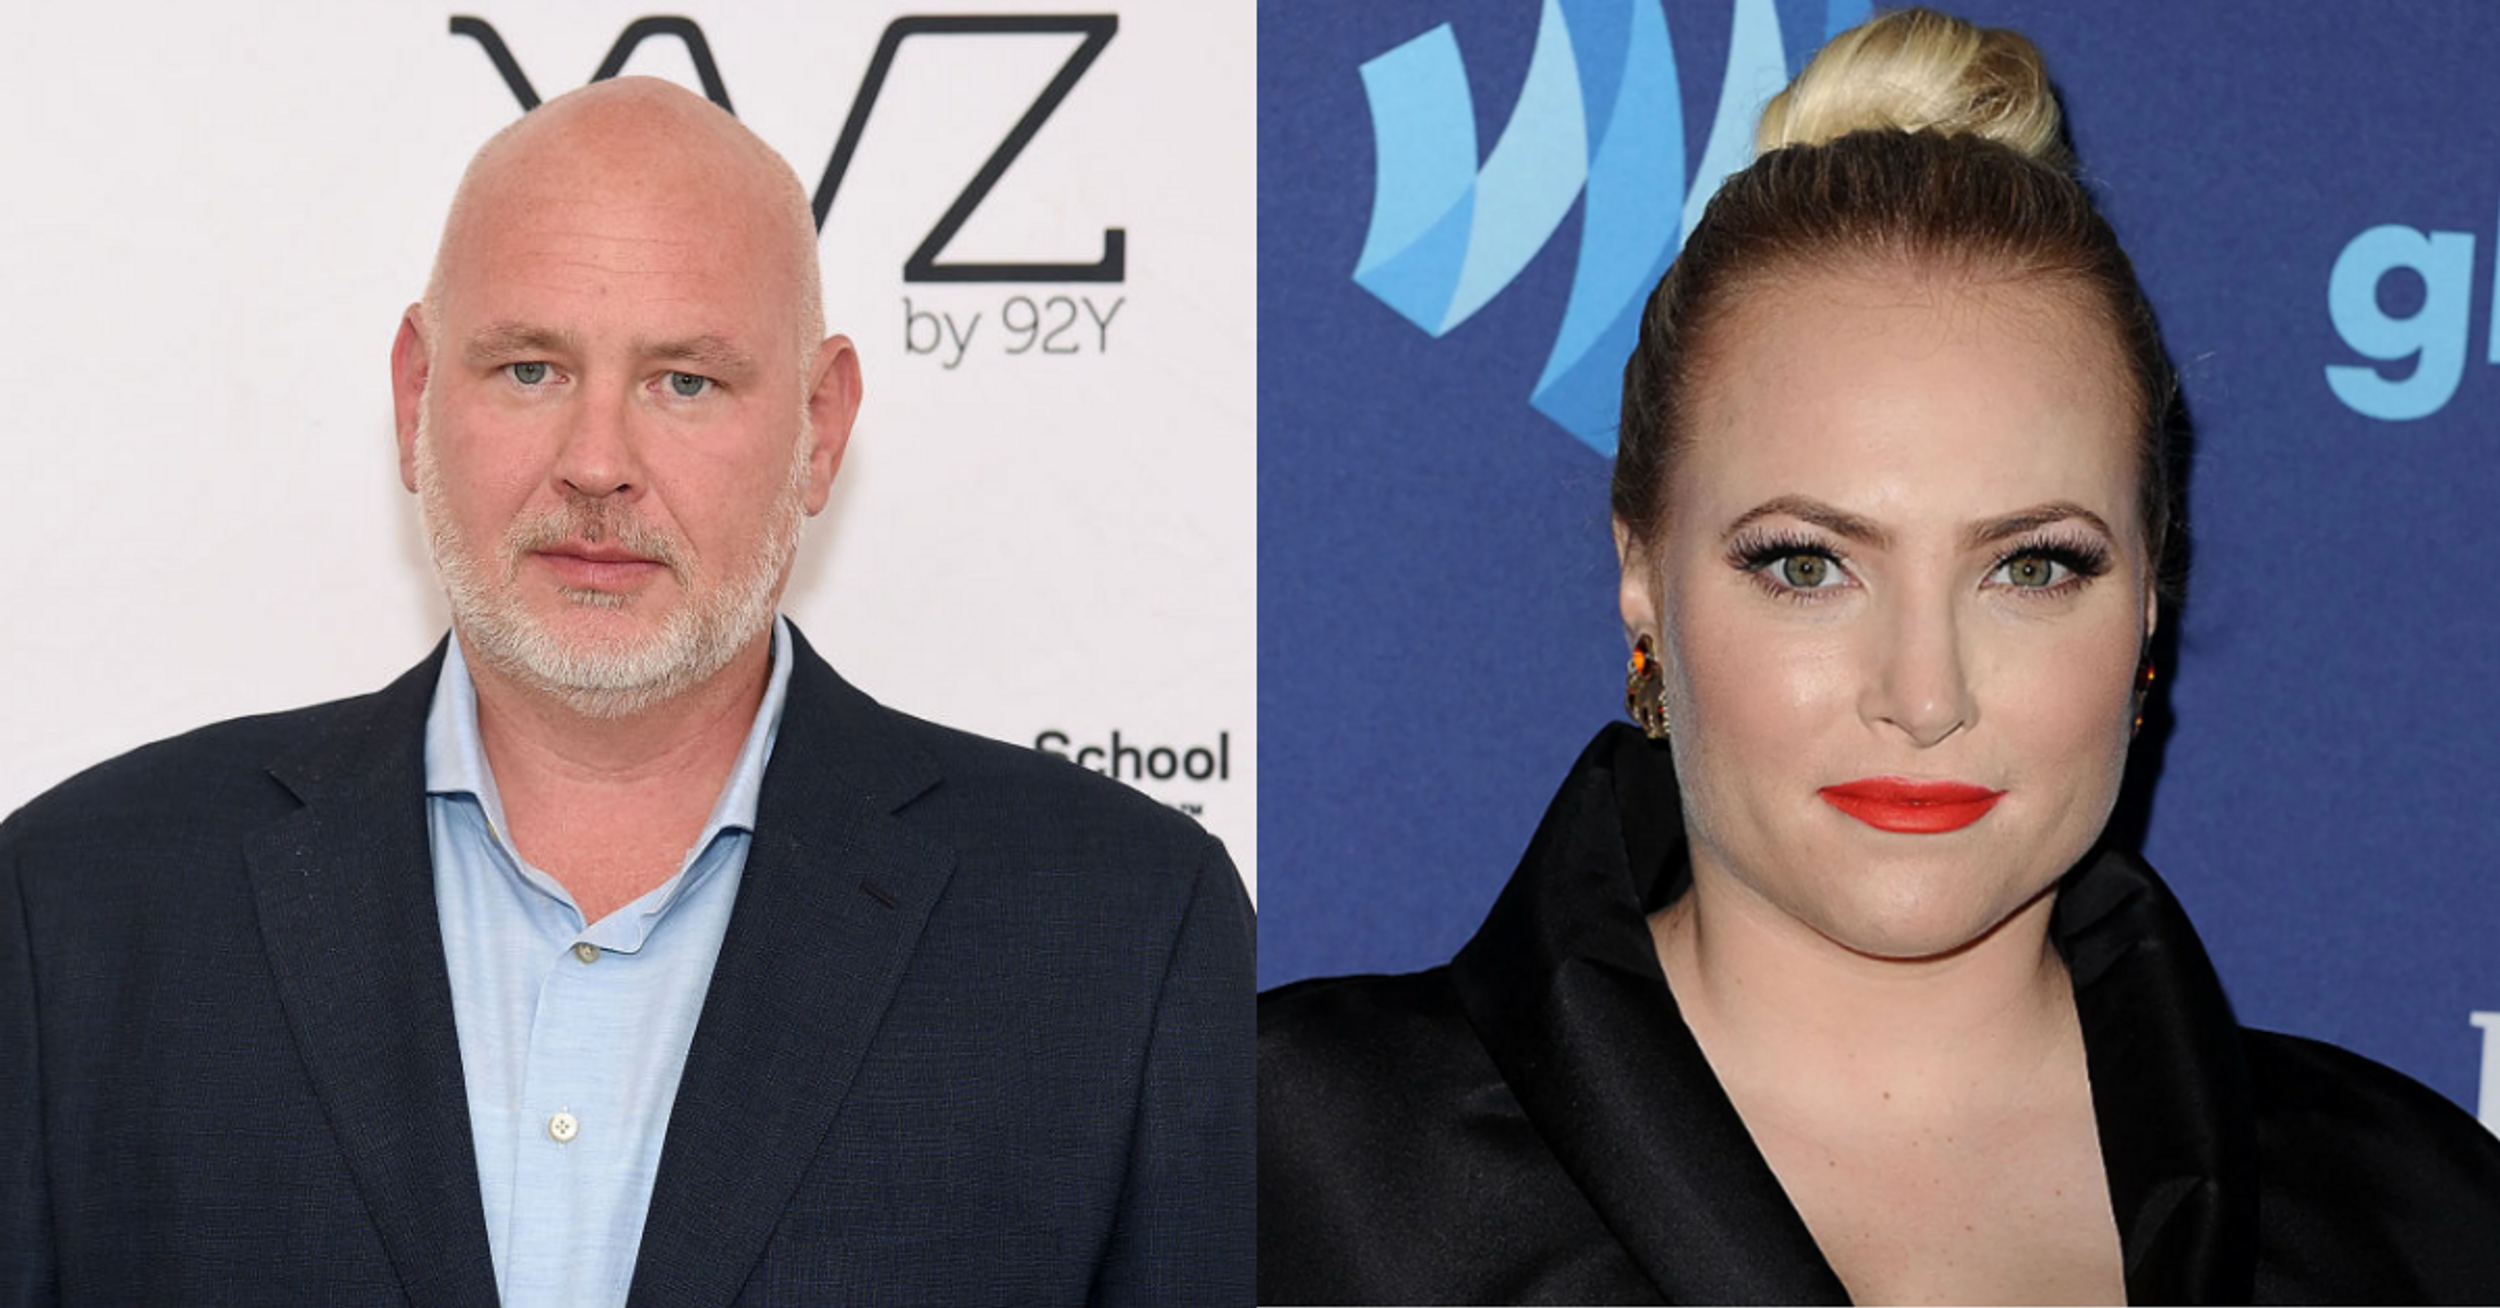 John McCain's 2008 Campaign Strategist Just Tore Meghan McCain A New One—And Twitter Is Grabbing The Popcorn